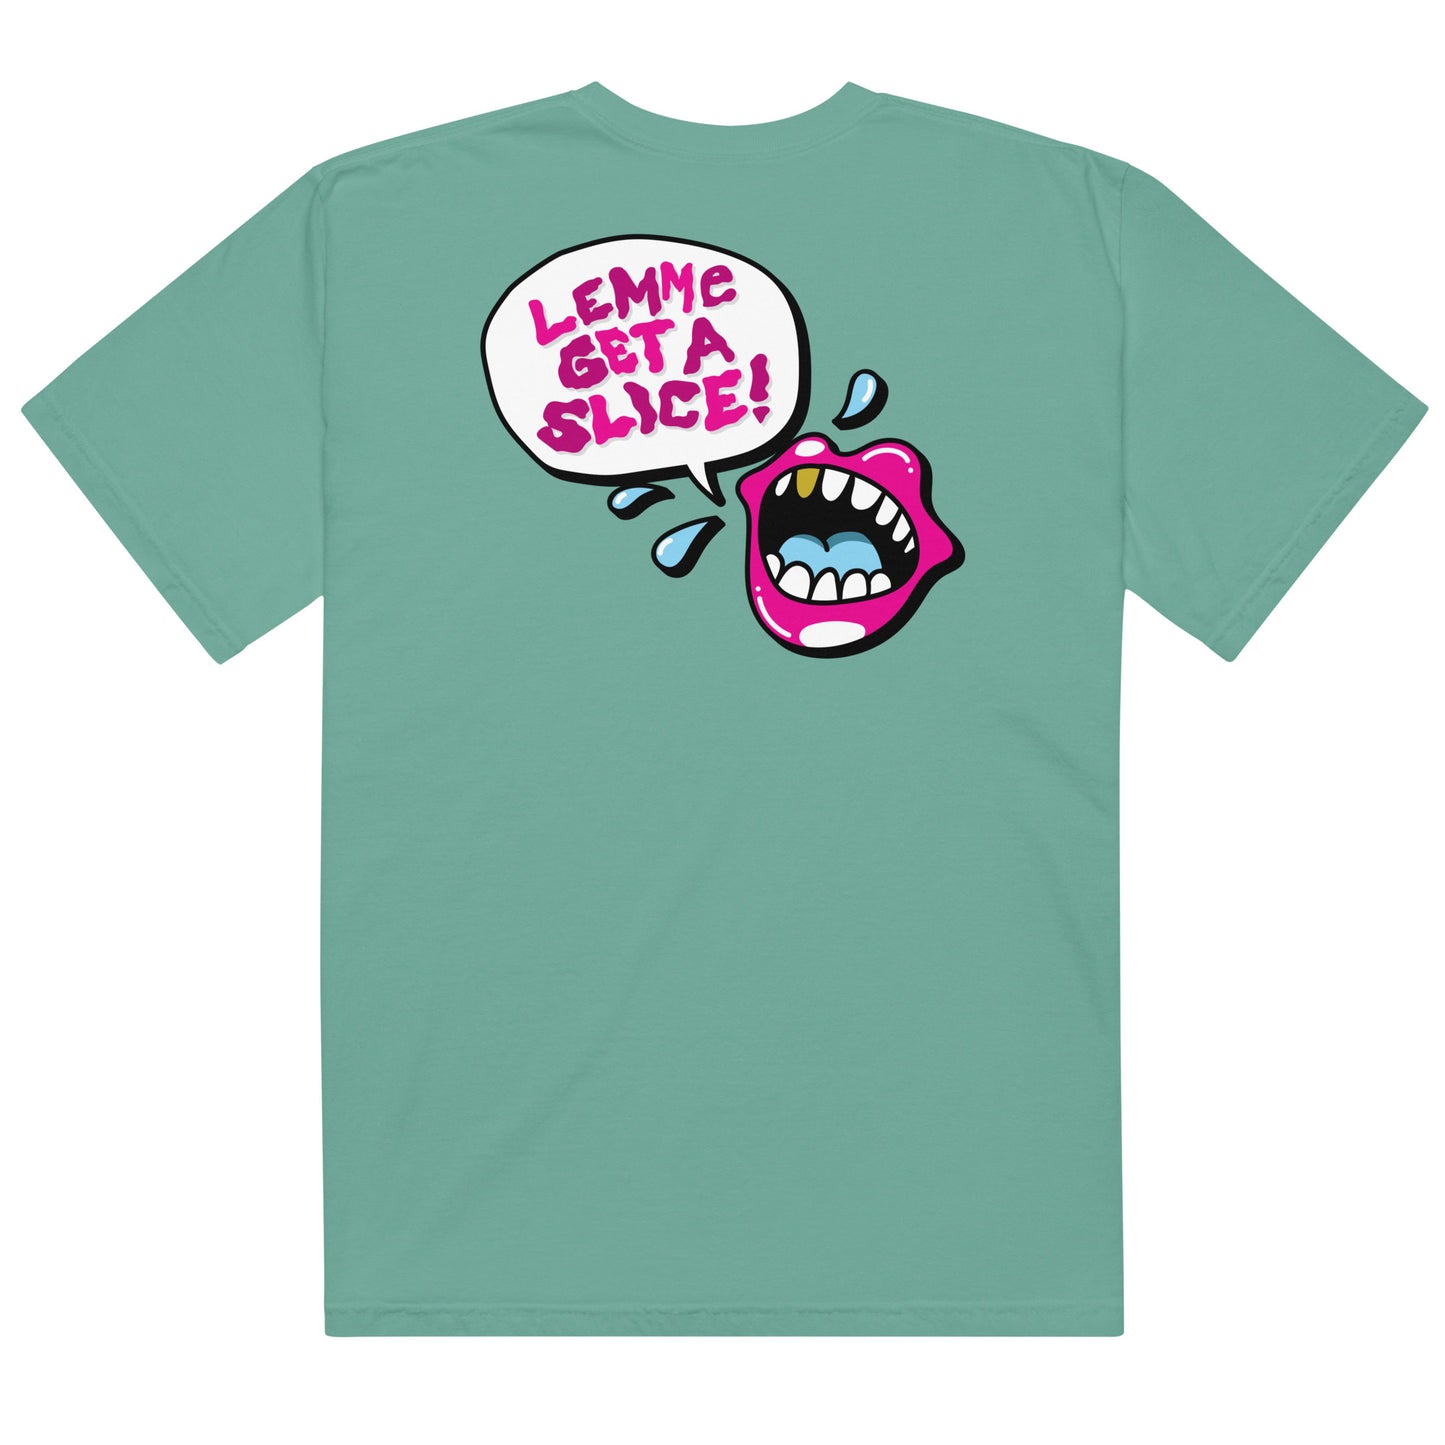 Ultra Slice - Say What? Tee